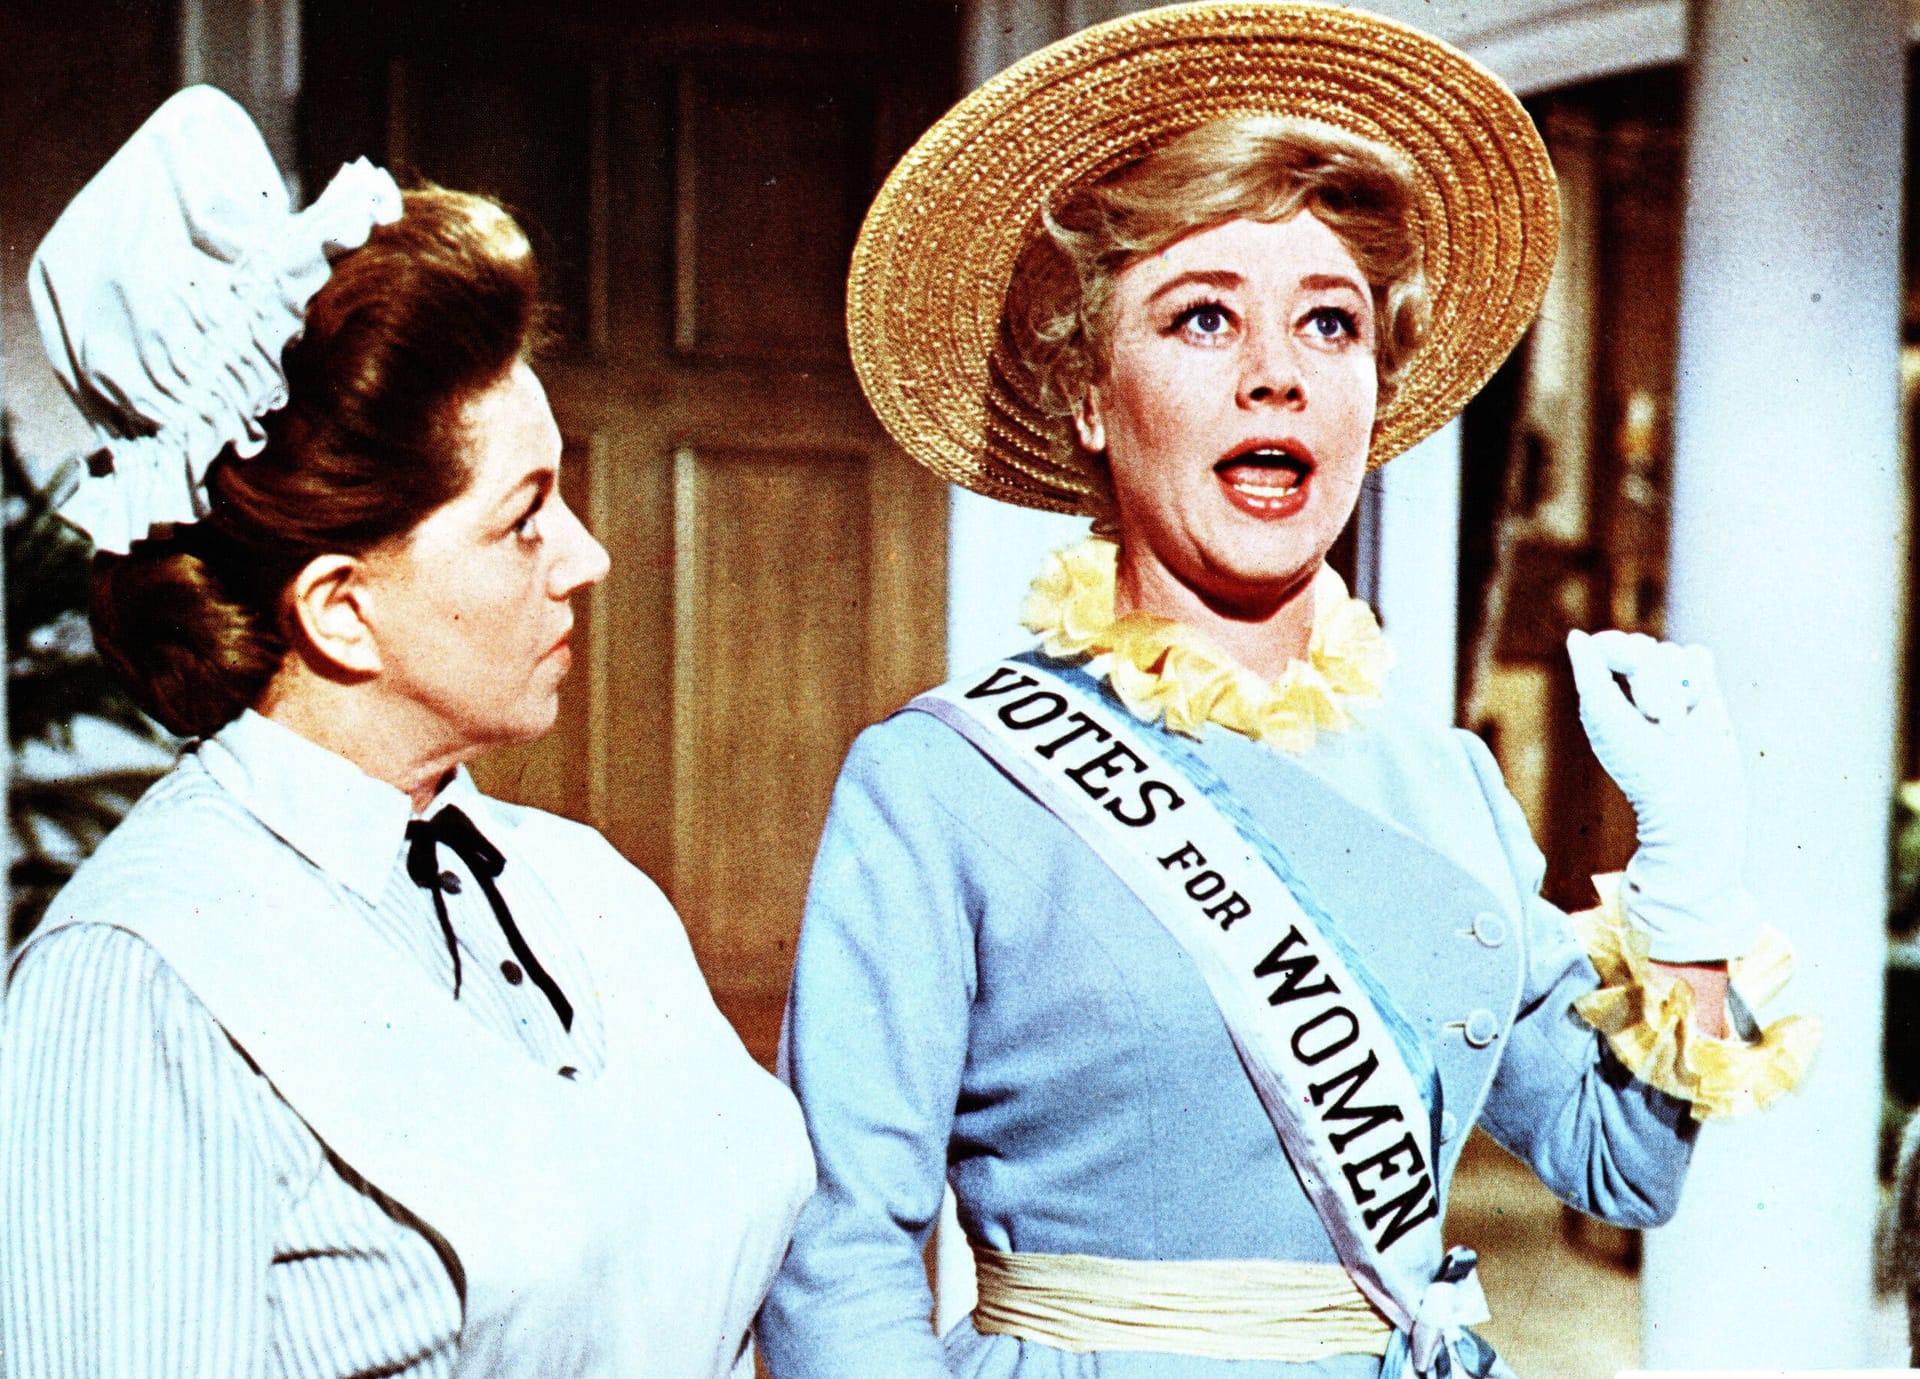 Glynis Johns (r.) spielte in "Mary Poppins" die Rolle der Winifred Banks.